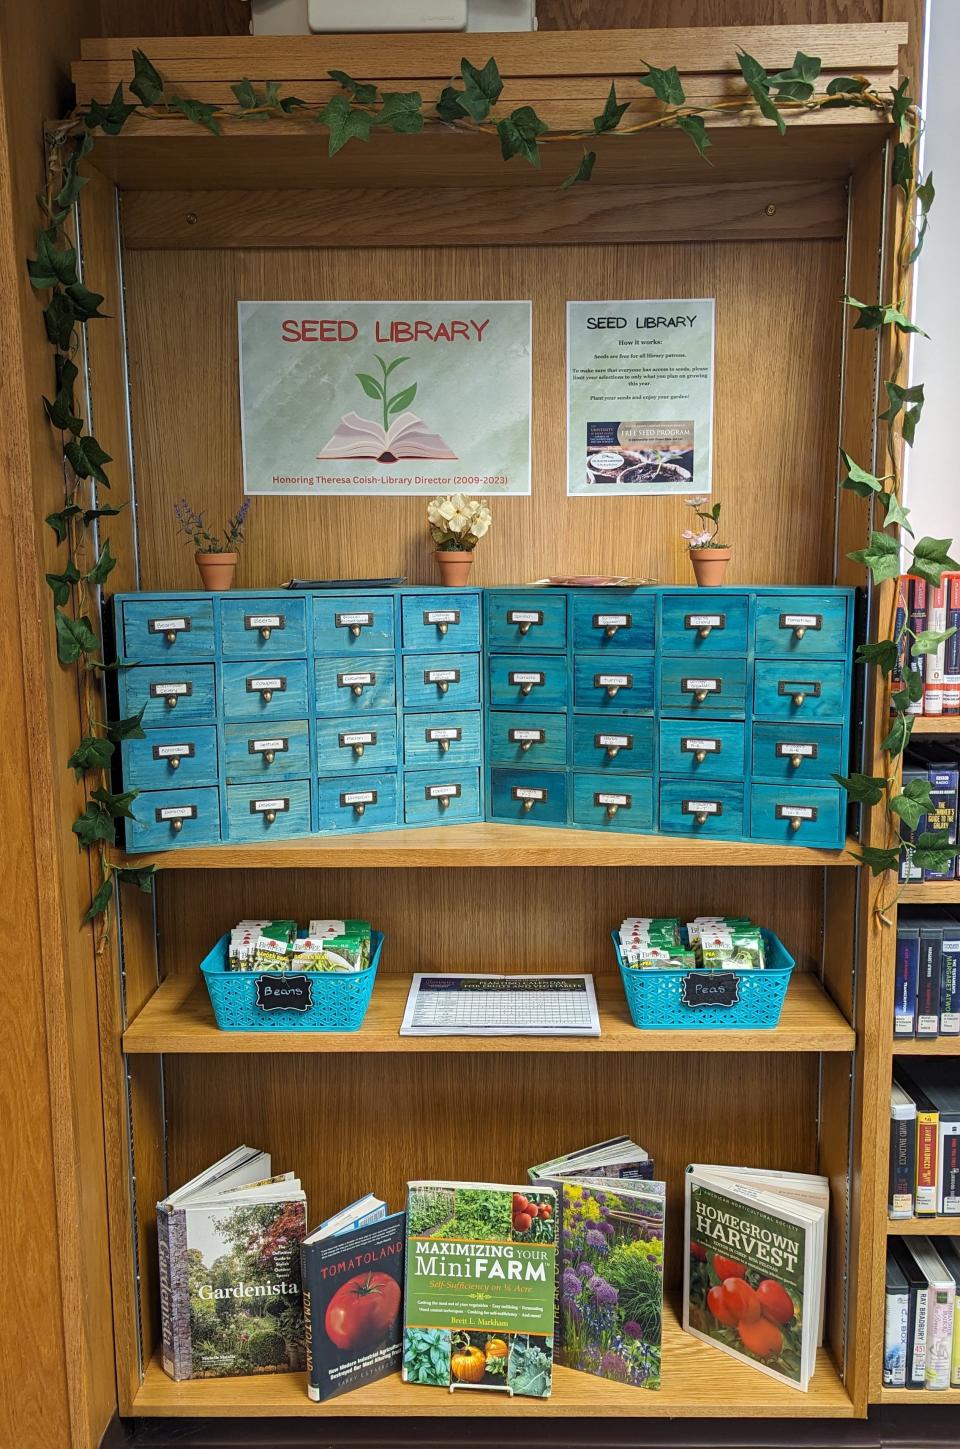 The seed library at the Middletown Public Library.